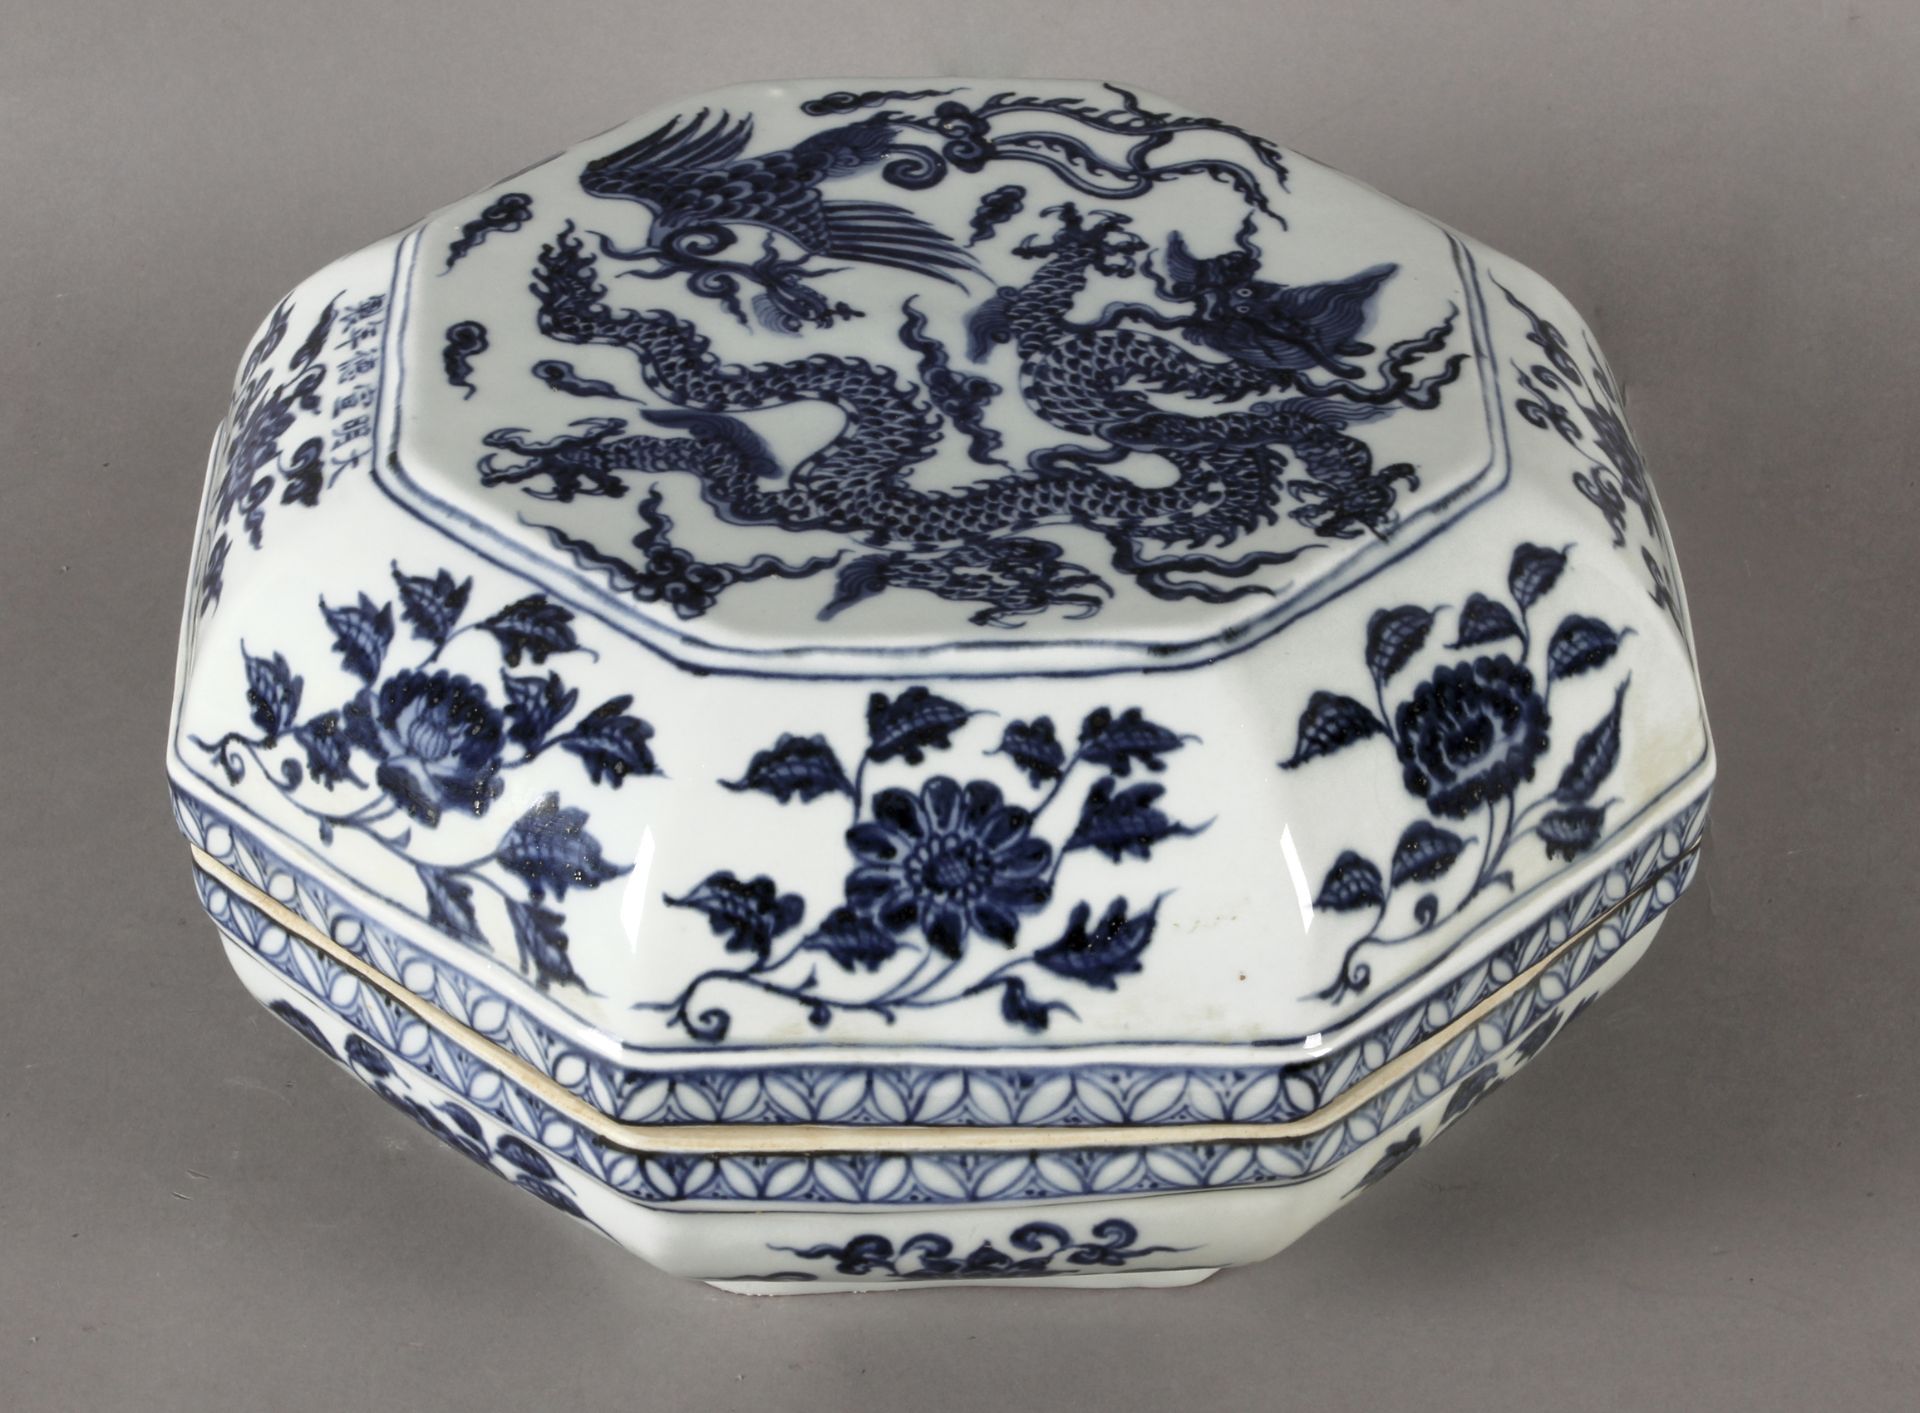 A 20th century Chinese porcelain box